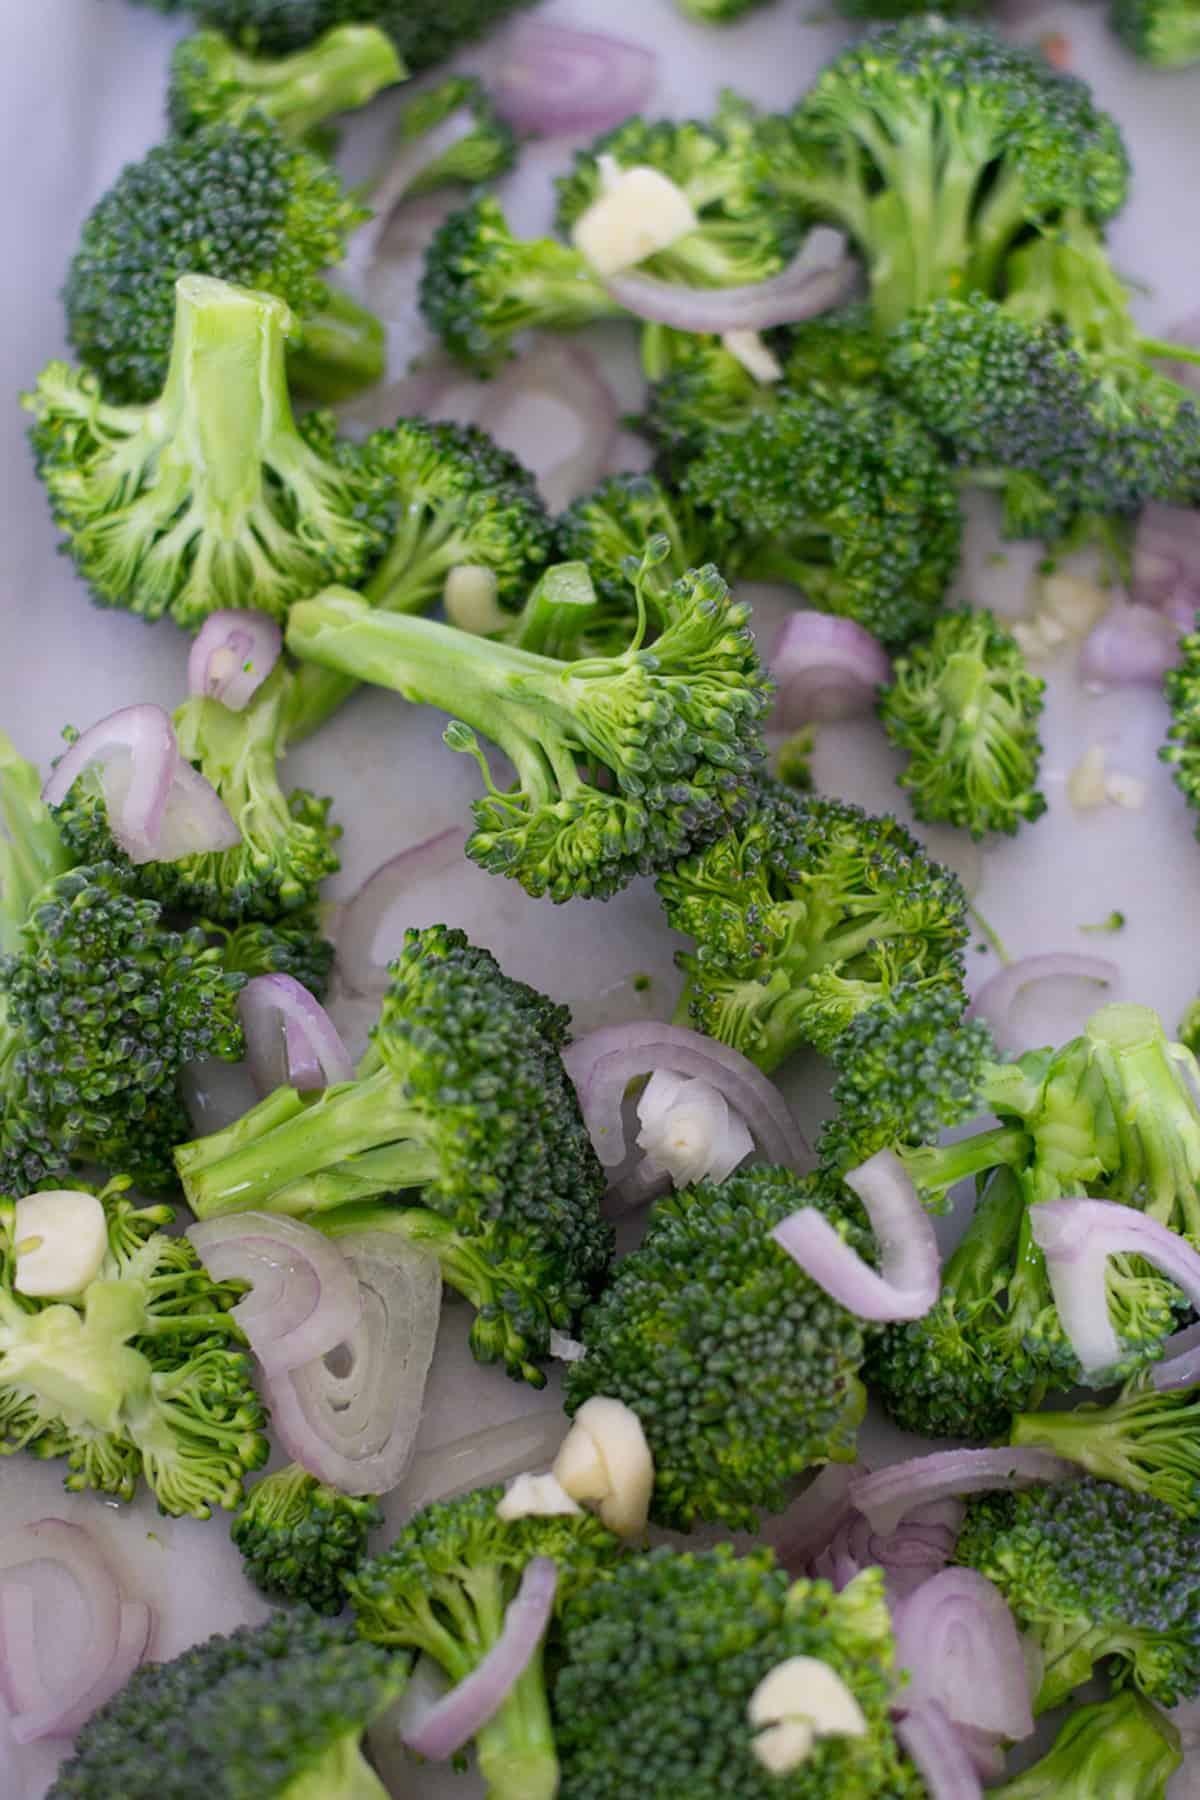 Before cooking - the broccoli, shallots and garlic on a cookie sheet